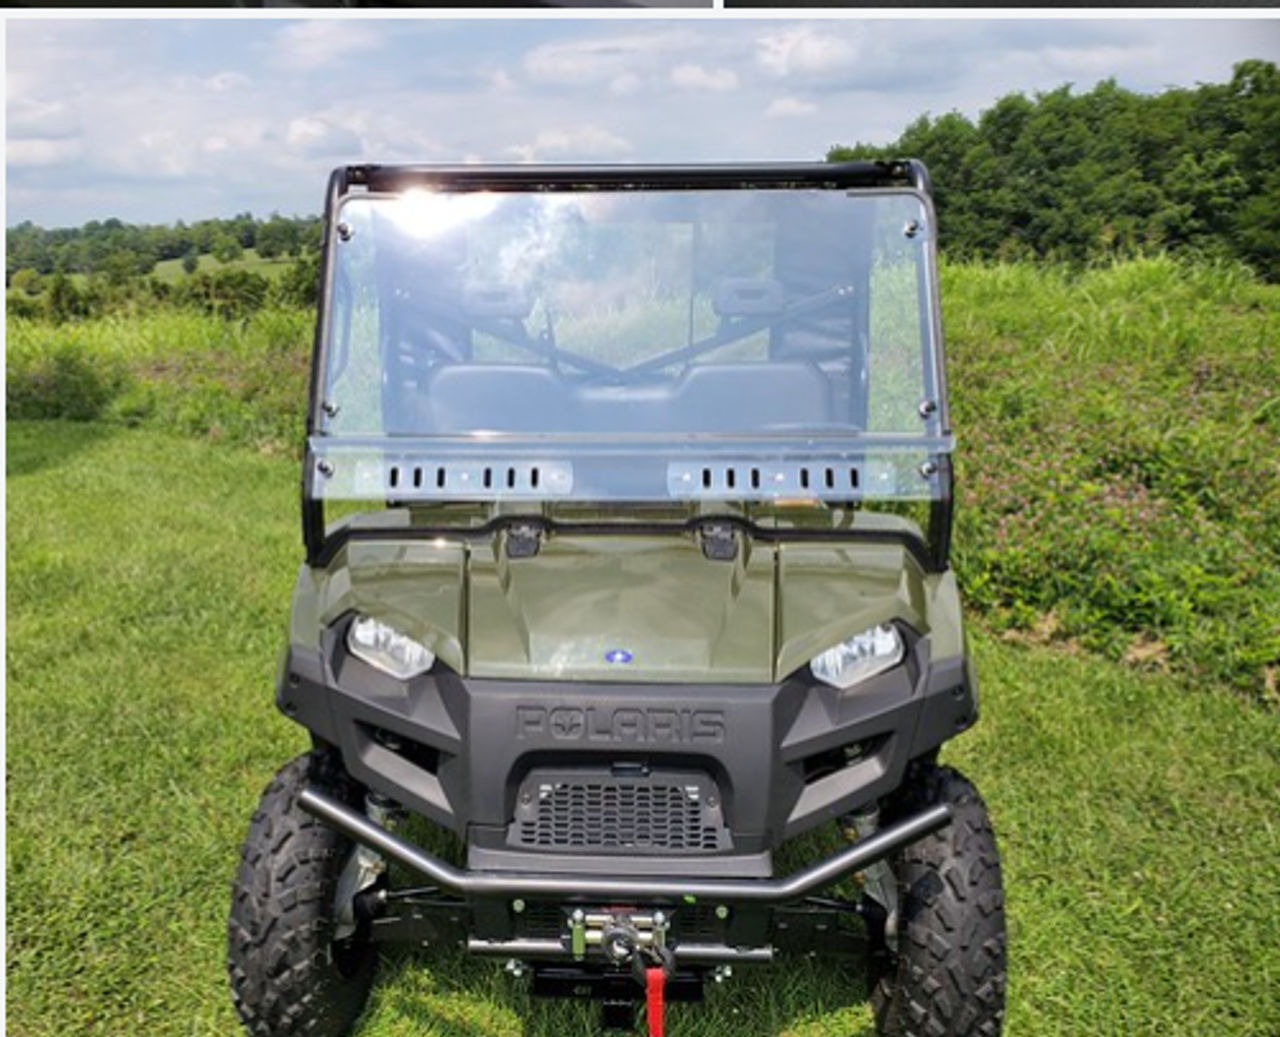 3 Star side x side Polaris Ranger Full-Size 570 Lexan polycarbonate windshield front view